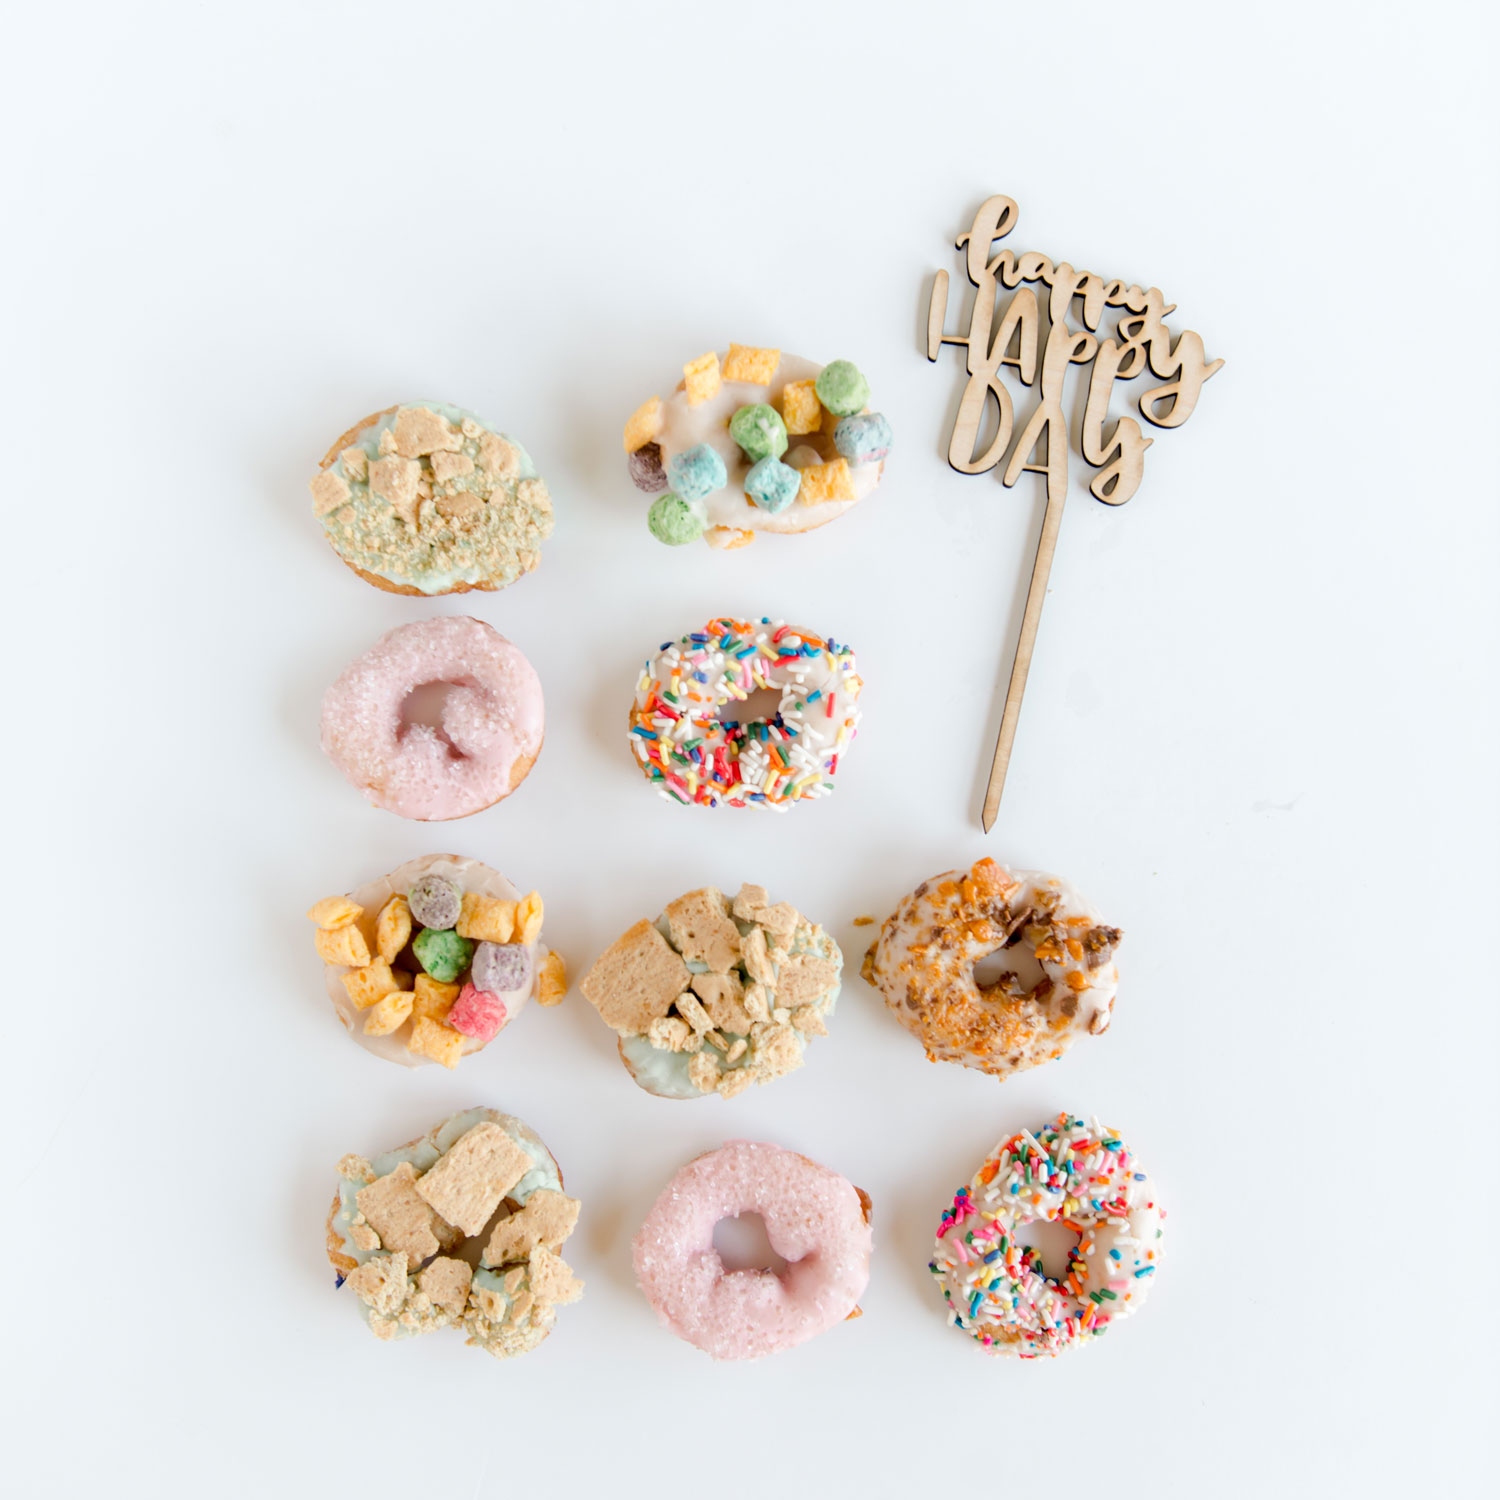 National donut day + a way to surprise your neighbors!